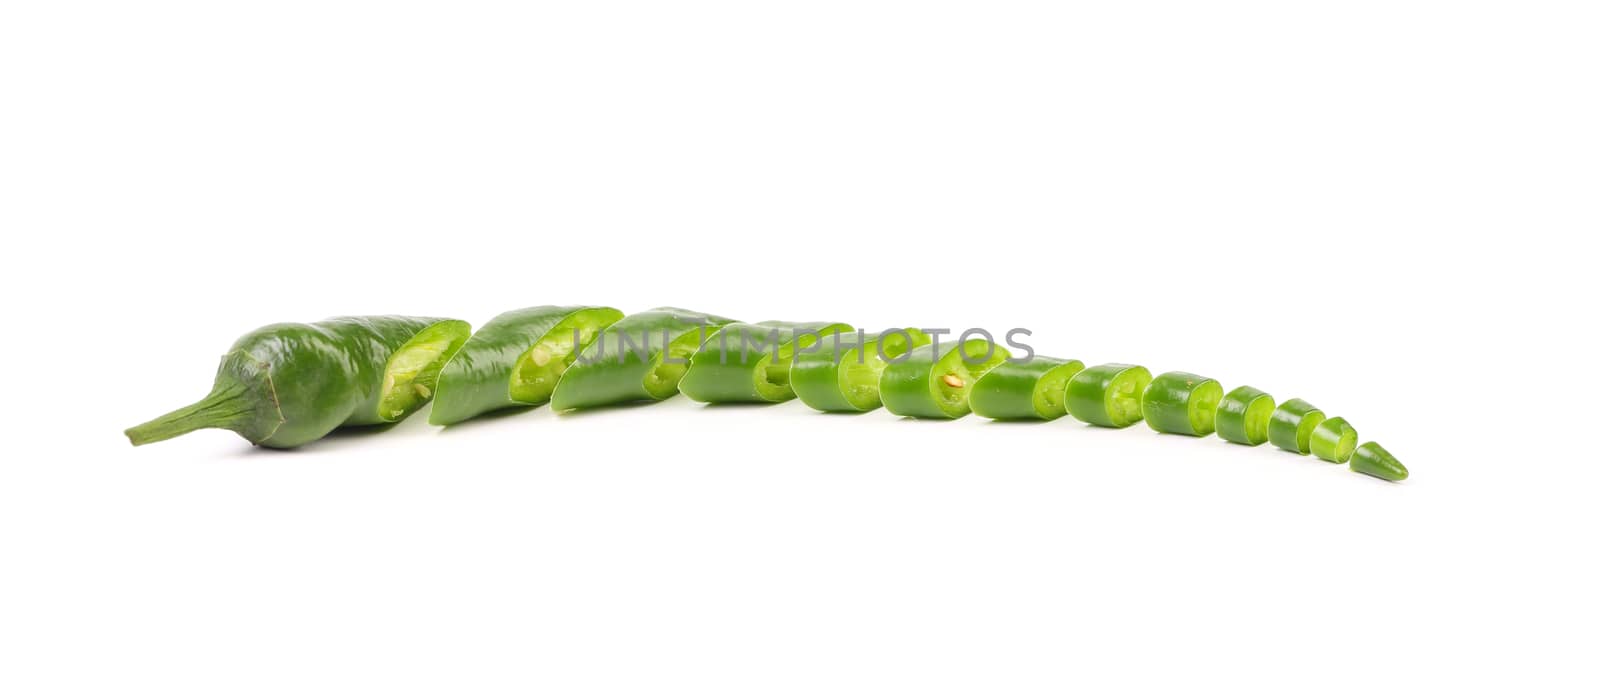 Slices of green pepper isolated on a white background